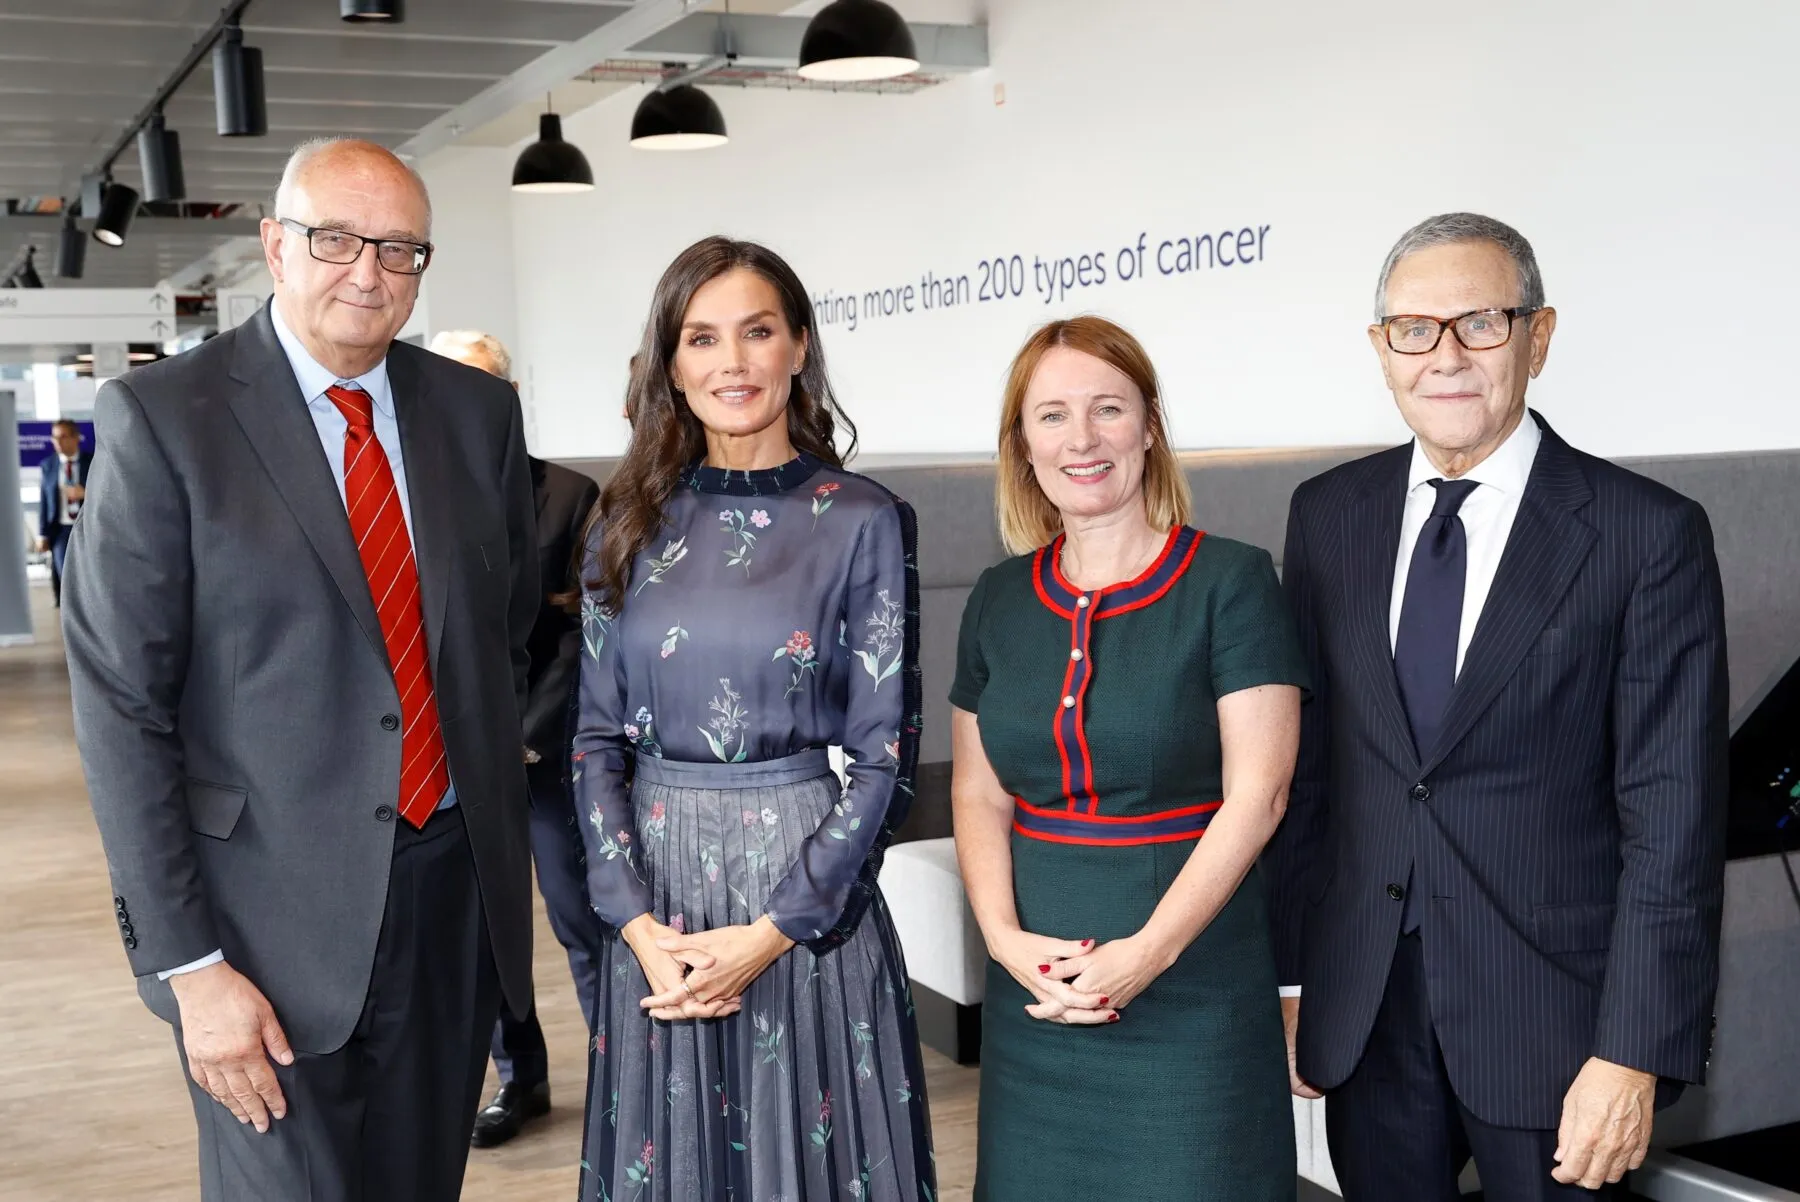 Queen Letizia of Spain with CRUK chairman Professor Sir Leszek Borysiewicz, chief executive Michelle Mitchell, and Ramon Reyes